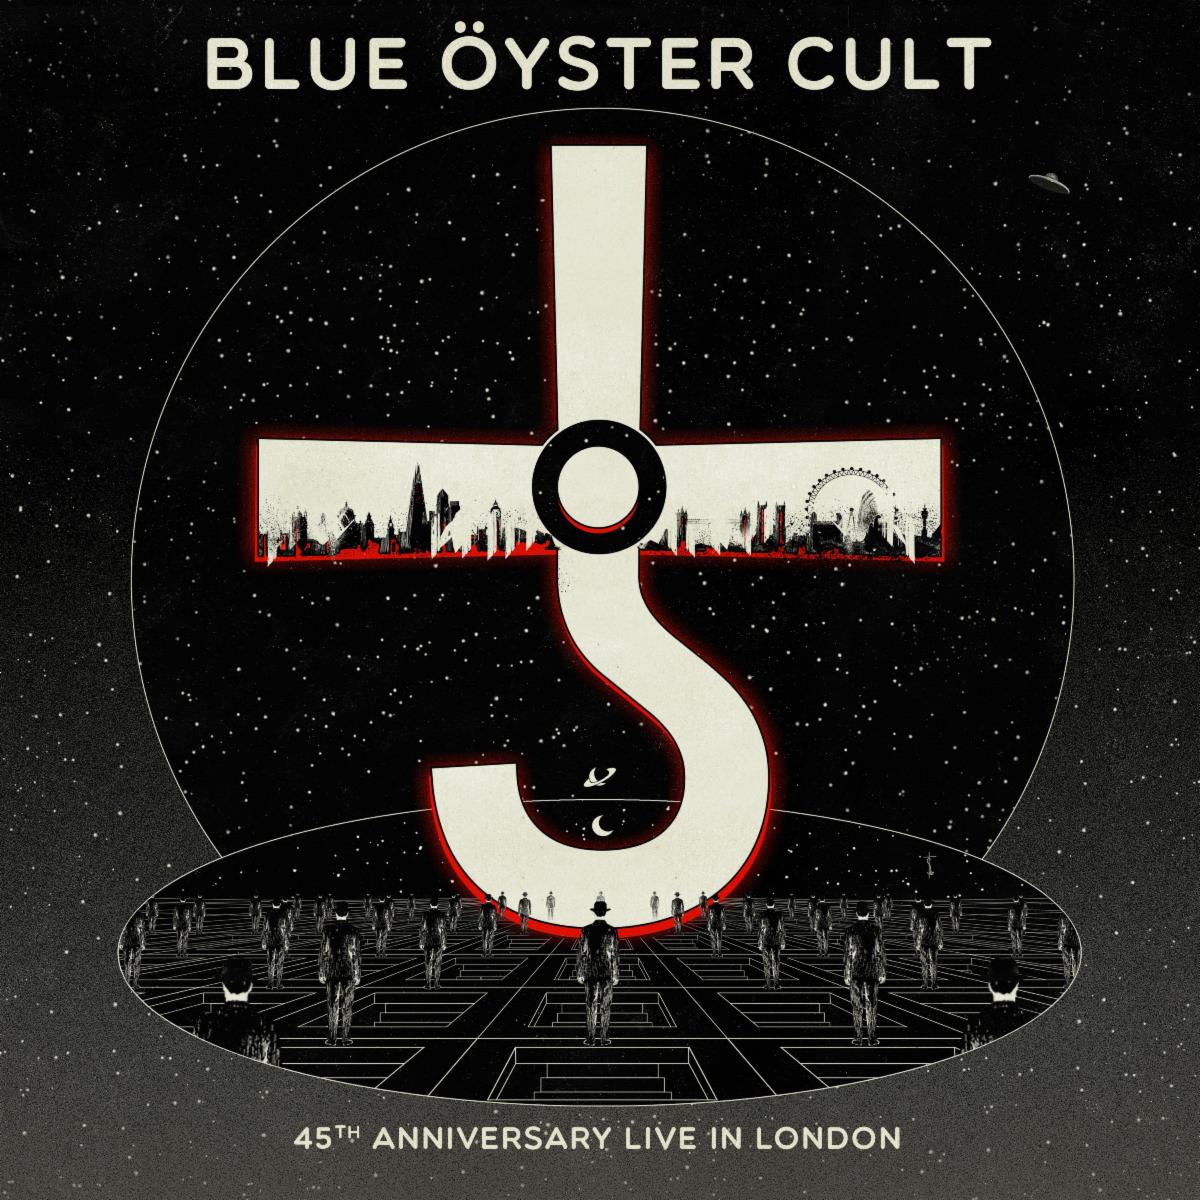 BLUE ÖYSTER CULT ANNOUNCE NEW ARCHIVAL LIVE RELEASE "45th ANNIVERSARY - LIVE IN LONDON" DUE AUGUST 7, 2020